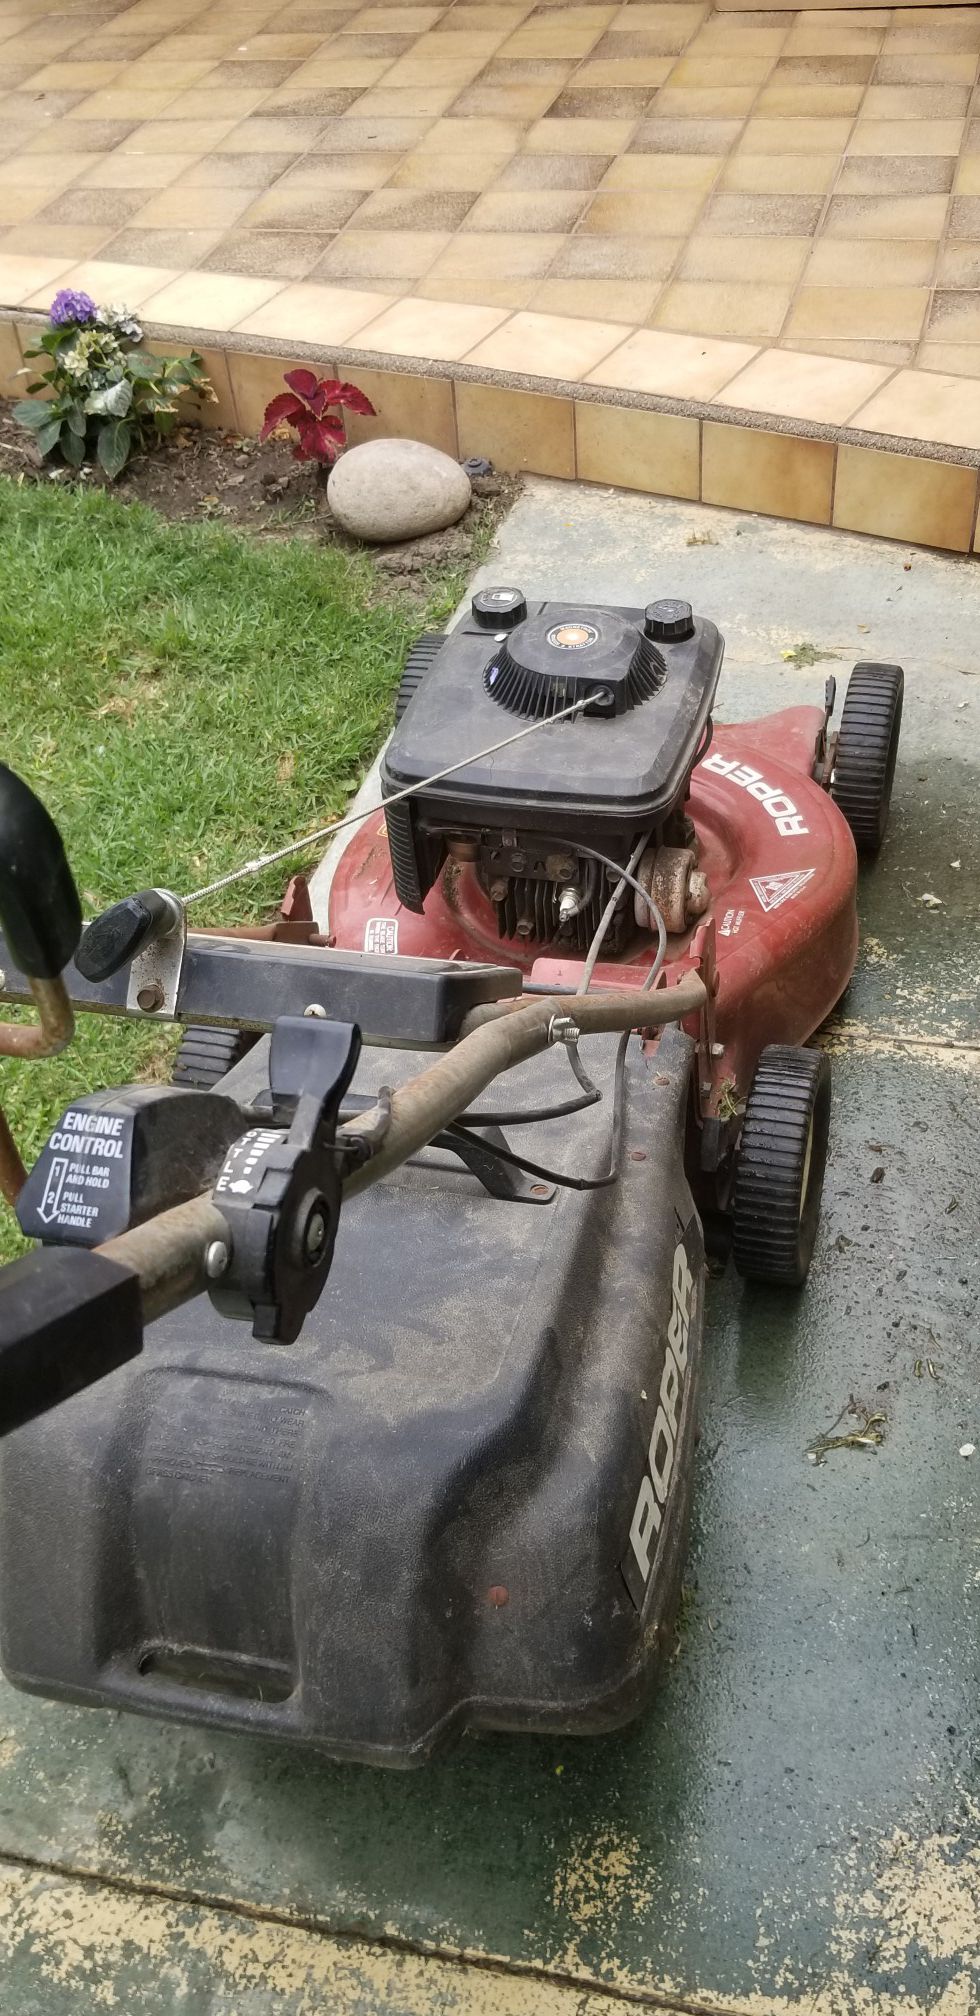 BLACK+DECKER 20 in. 13 AMP Corded Electric Walk Behind Push Lawn Mower(MISSING  BAS) for Sale in Fullerton, CA - OfferUp